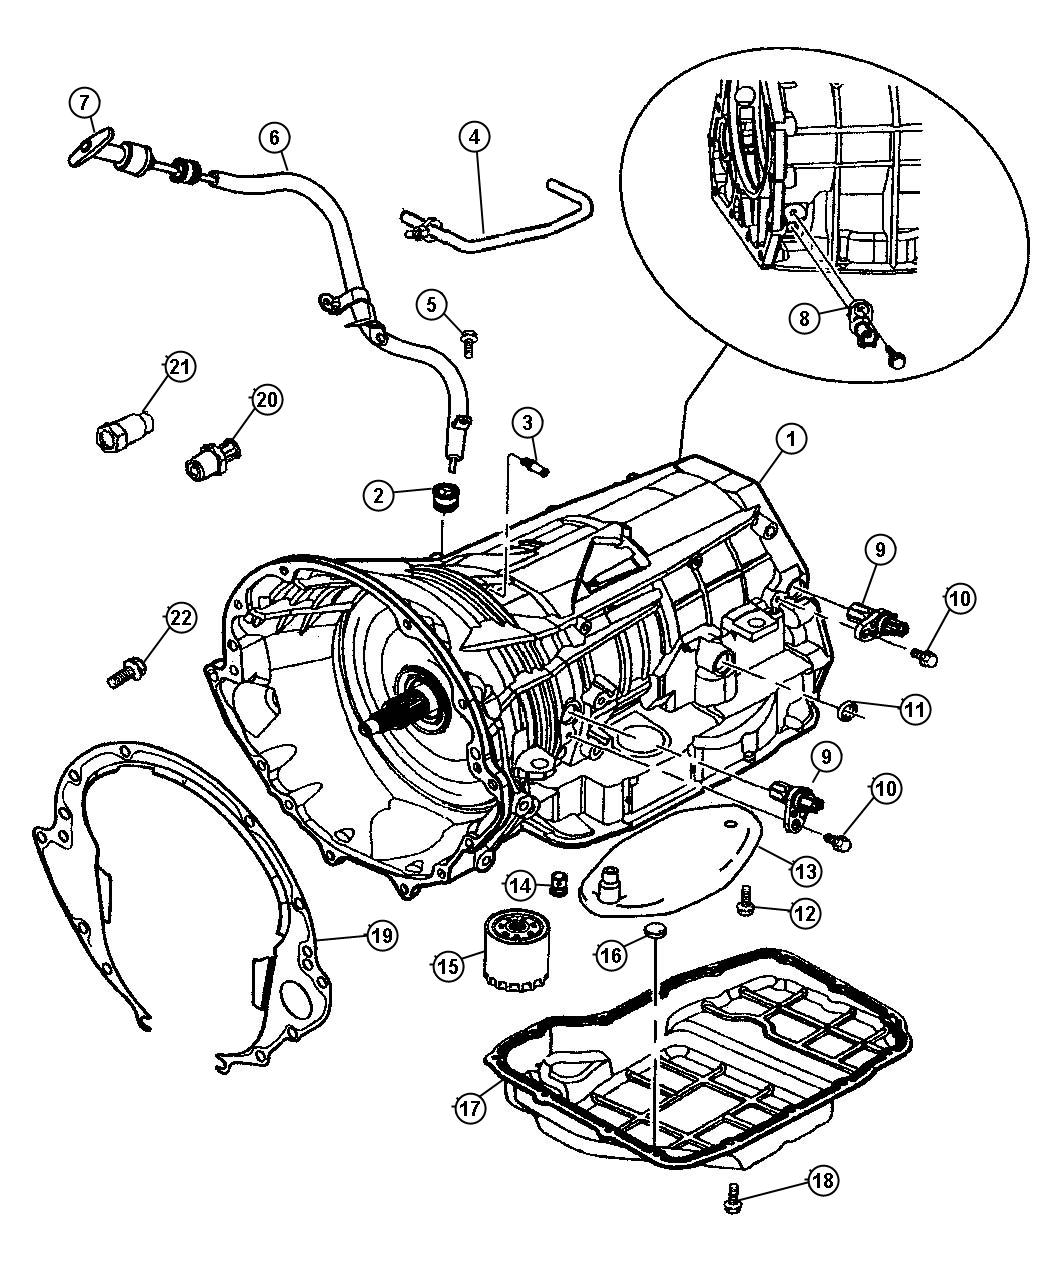 Case And Related Parts [45RFE] [5-Spd Automatic 545RFE Transmission]. Diagram